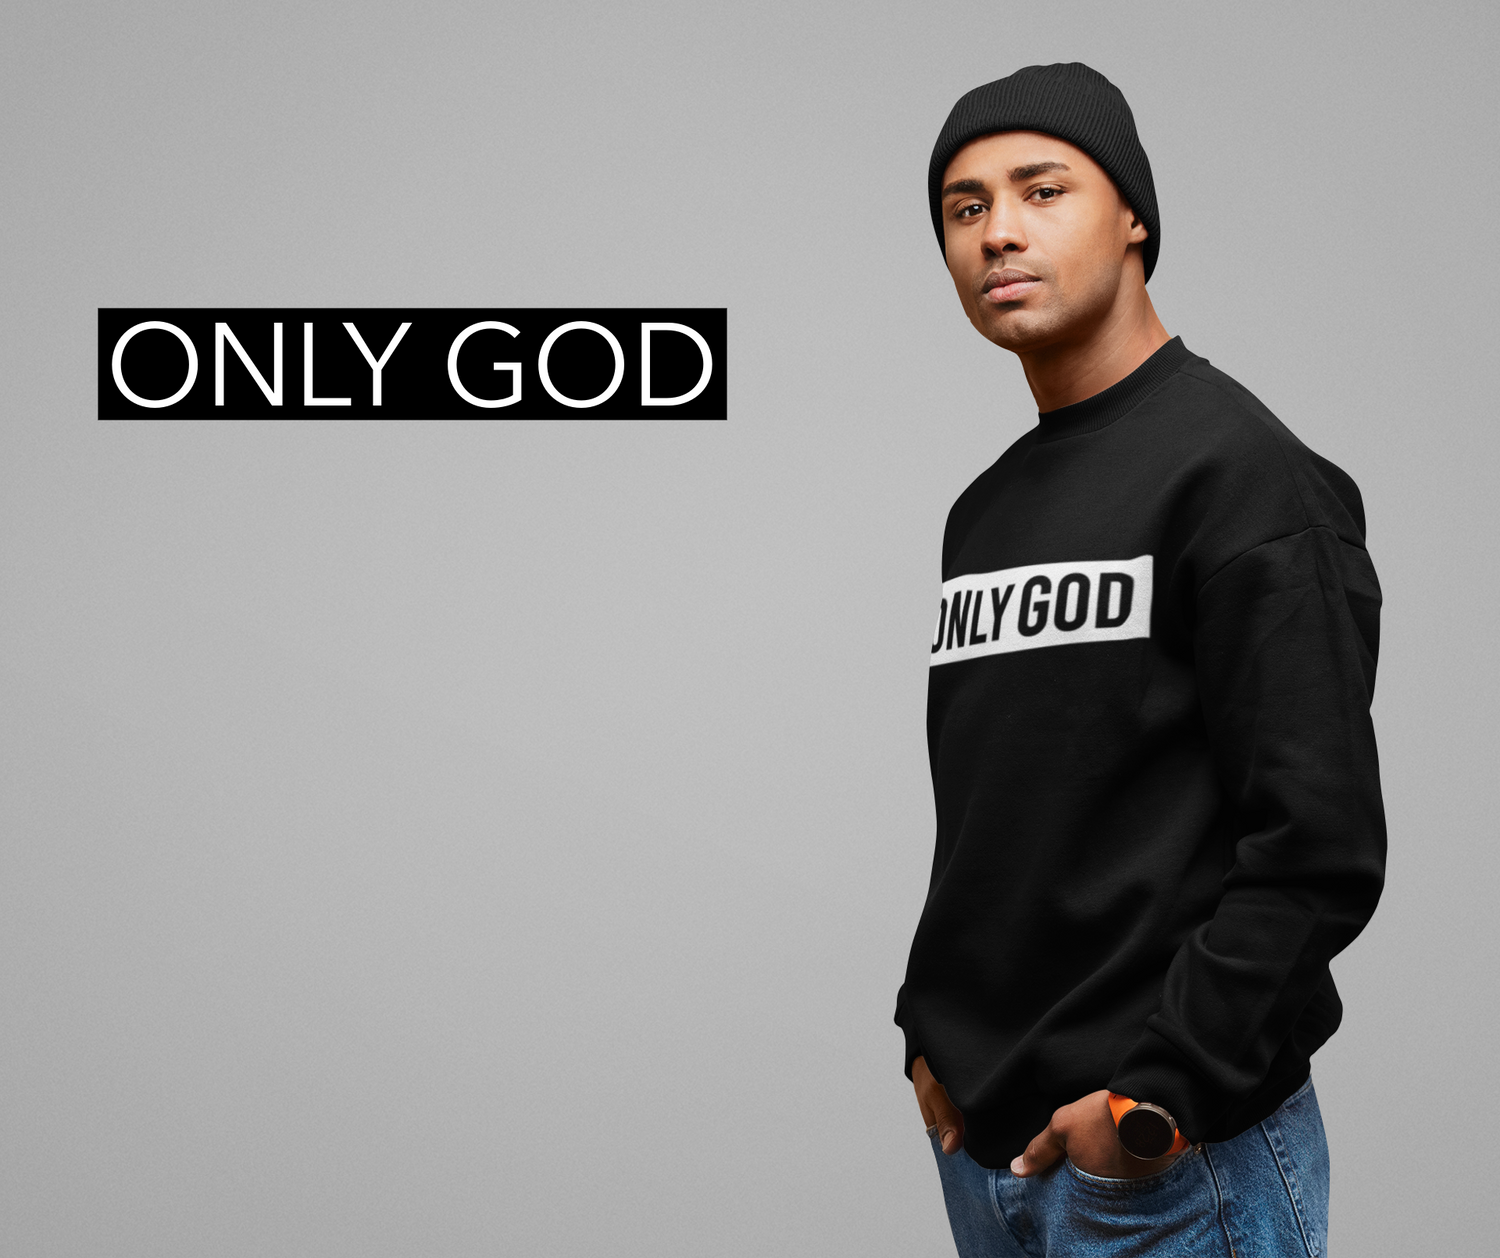 Only God Collection/ Christian T-shirts and Hoodies